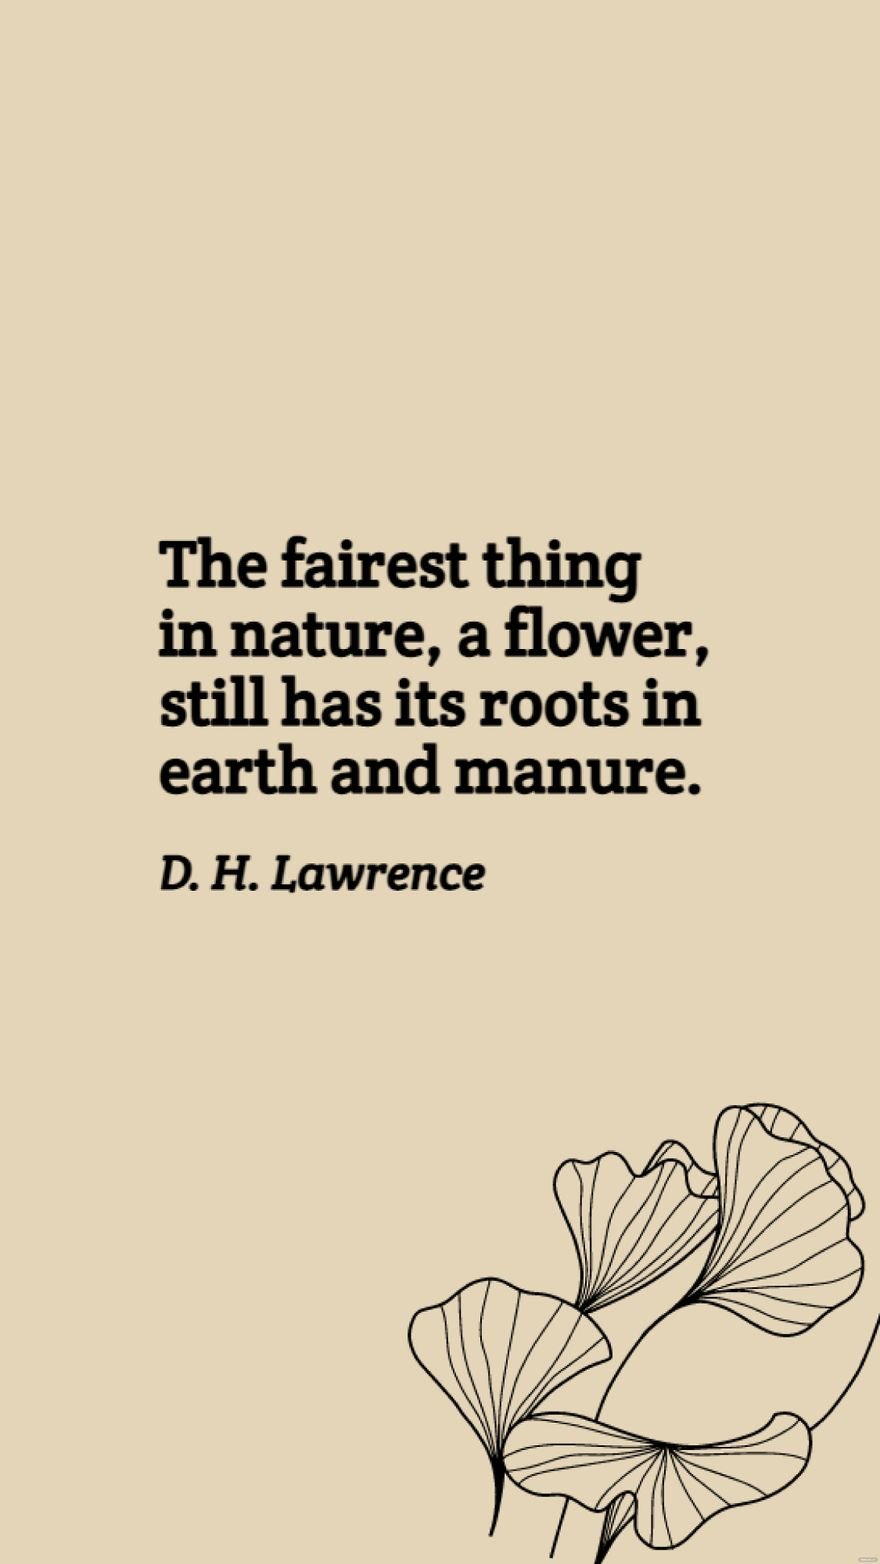 Free D. H. Lawrence - The fairest thing in nature, a flower, still has its roots in earth and manure. in JPG